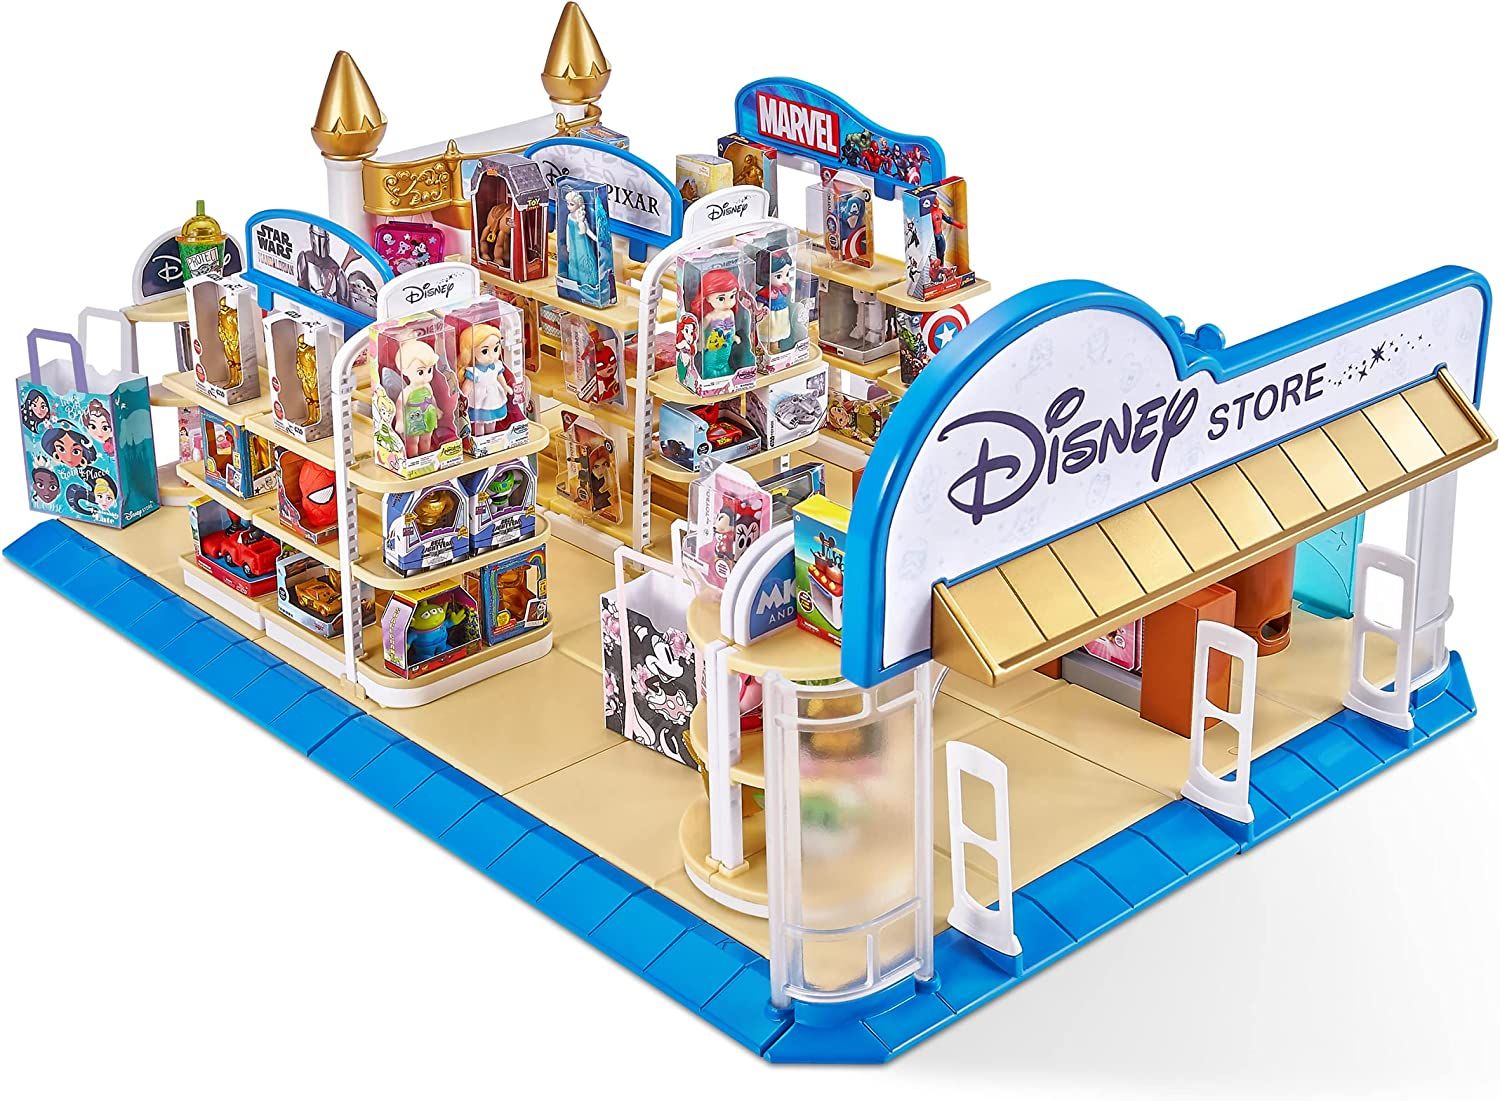 Disney mini brands store is one of the best Disney collectibles